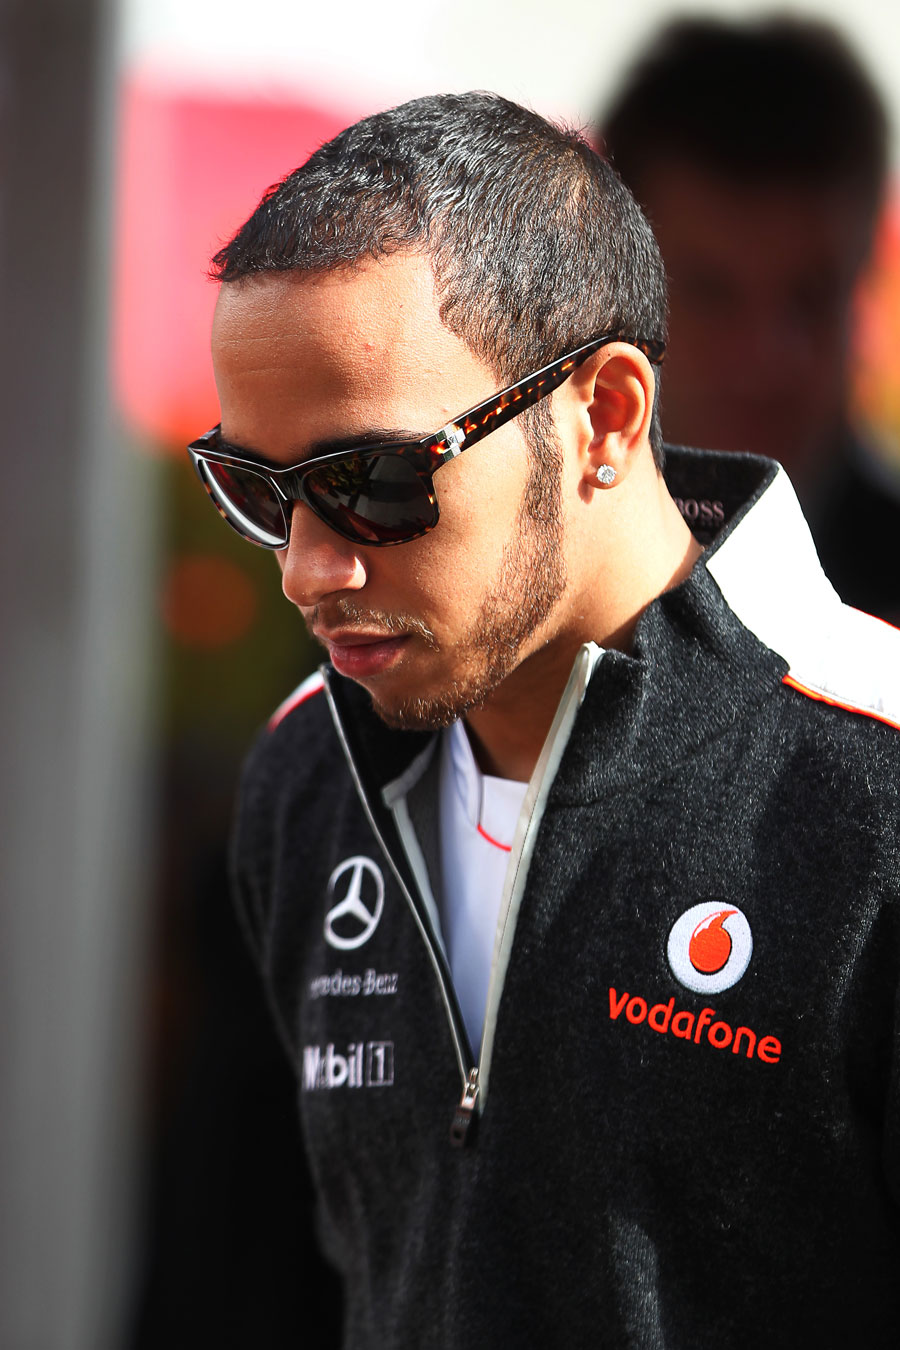 Lewis Hamilton arrives in the paddock on Thursday morning